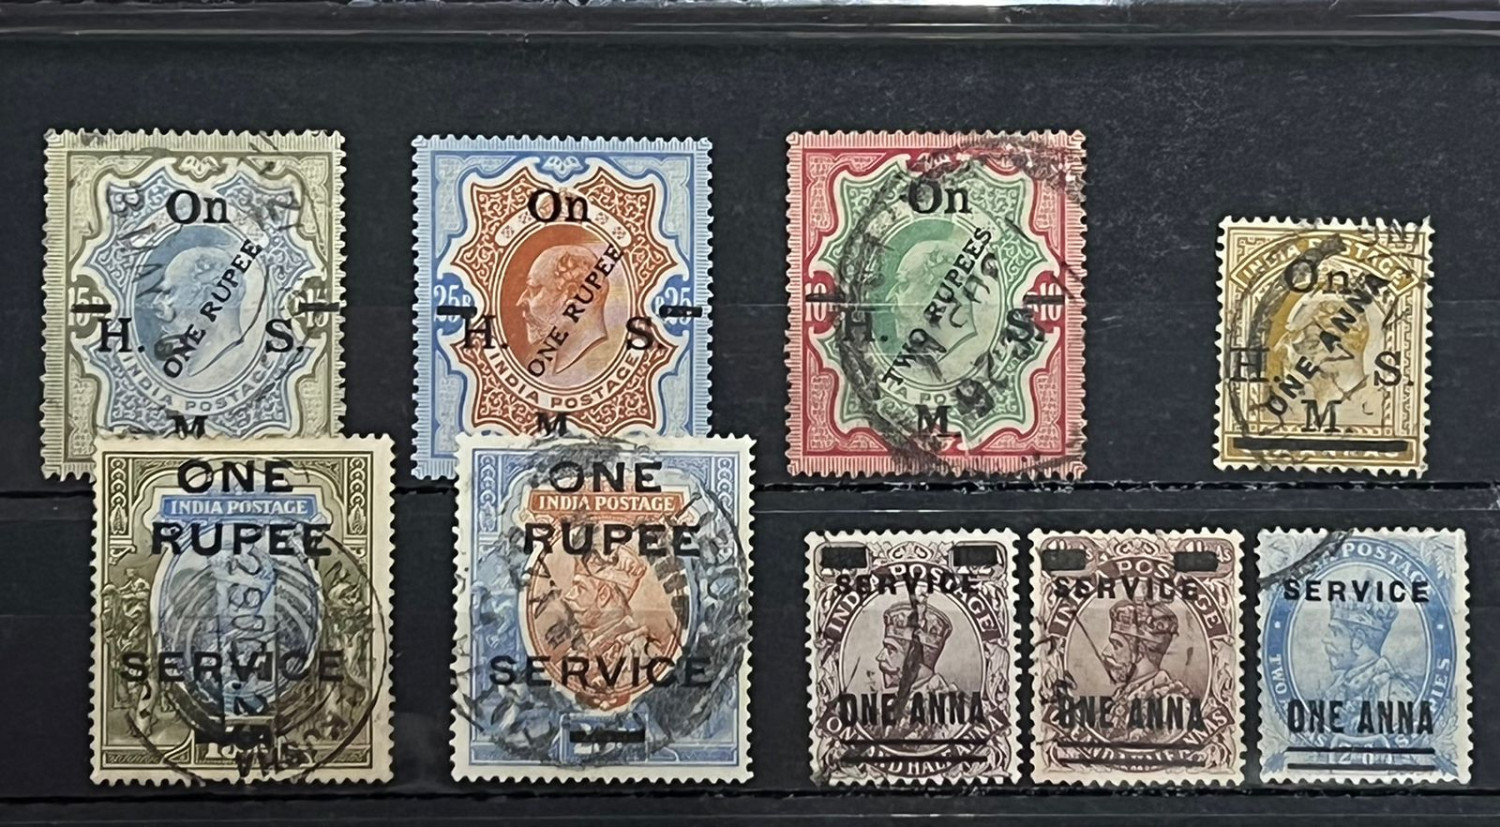 India 1925 Official Complete set of all Provisional Issues Overprinted.. Fine Used Rare SG Cat Val  £250+